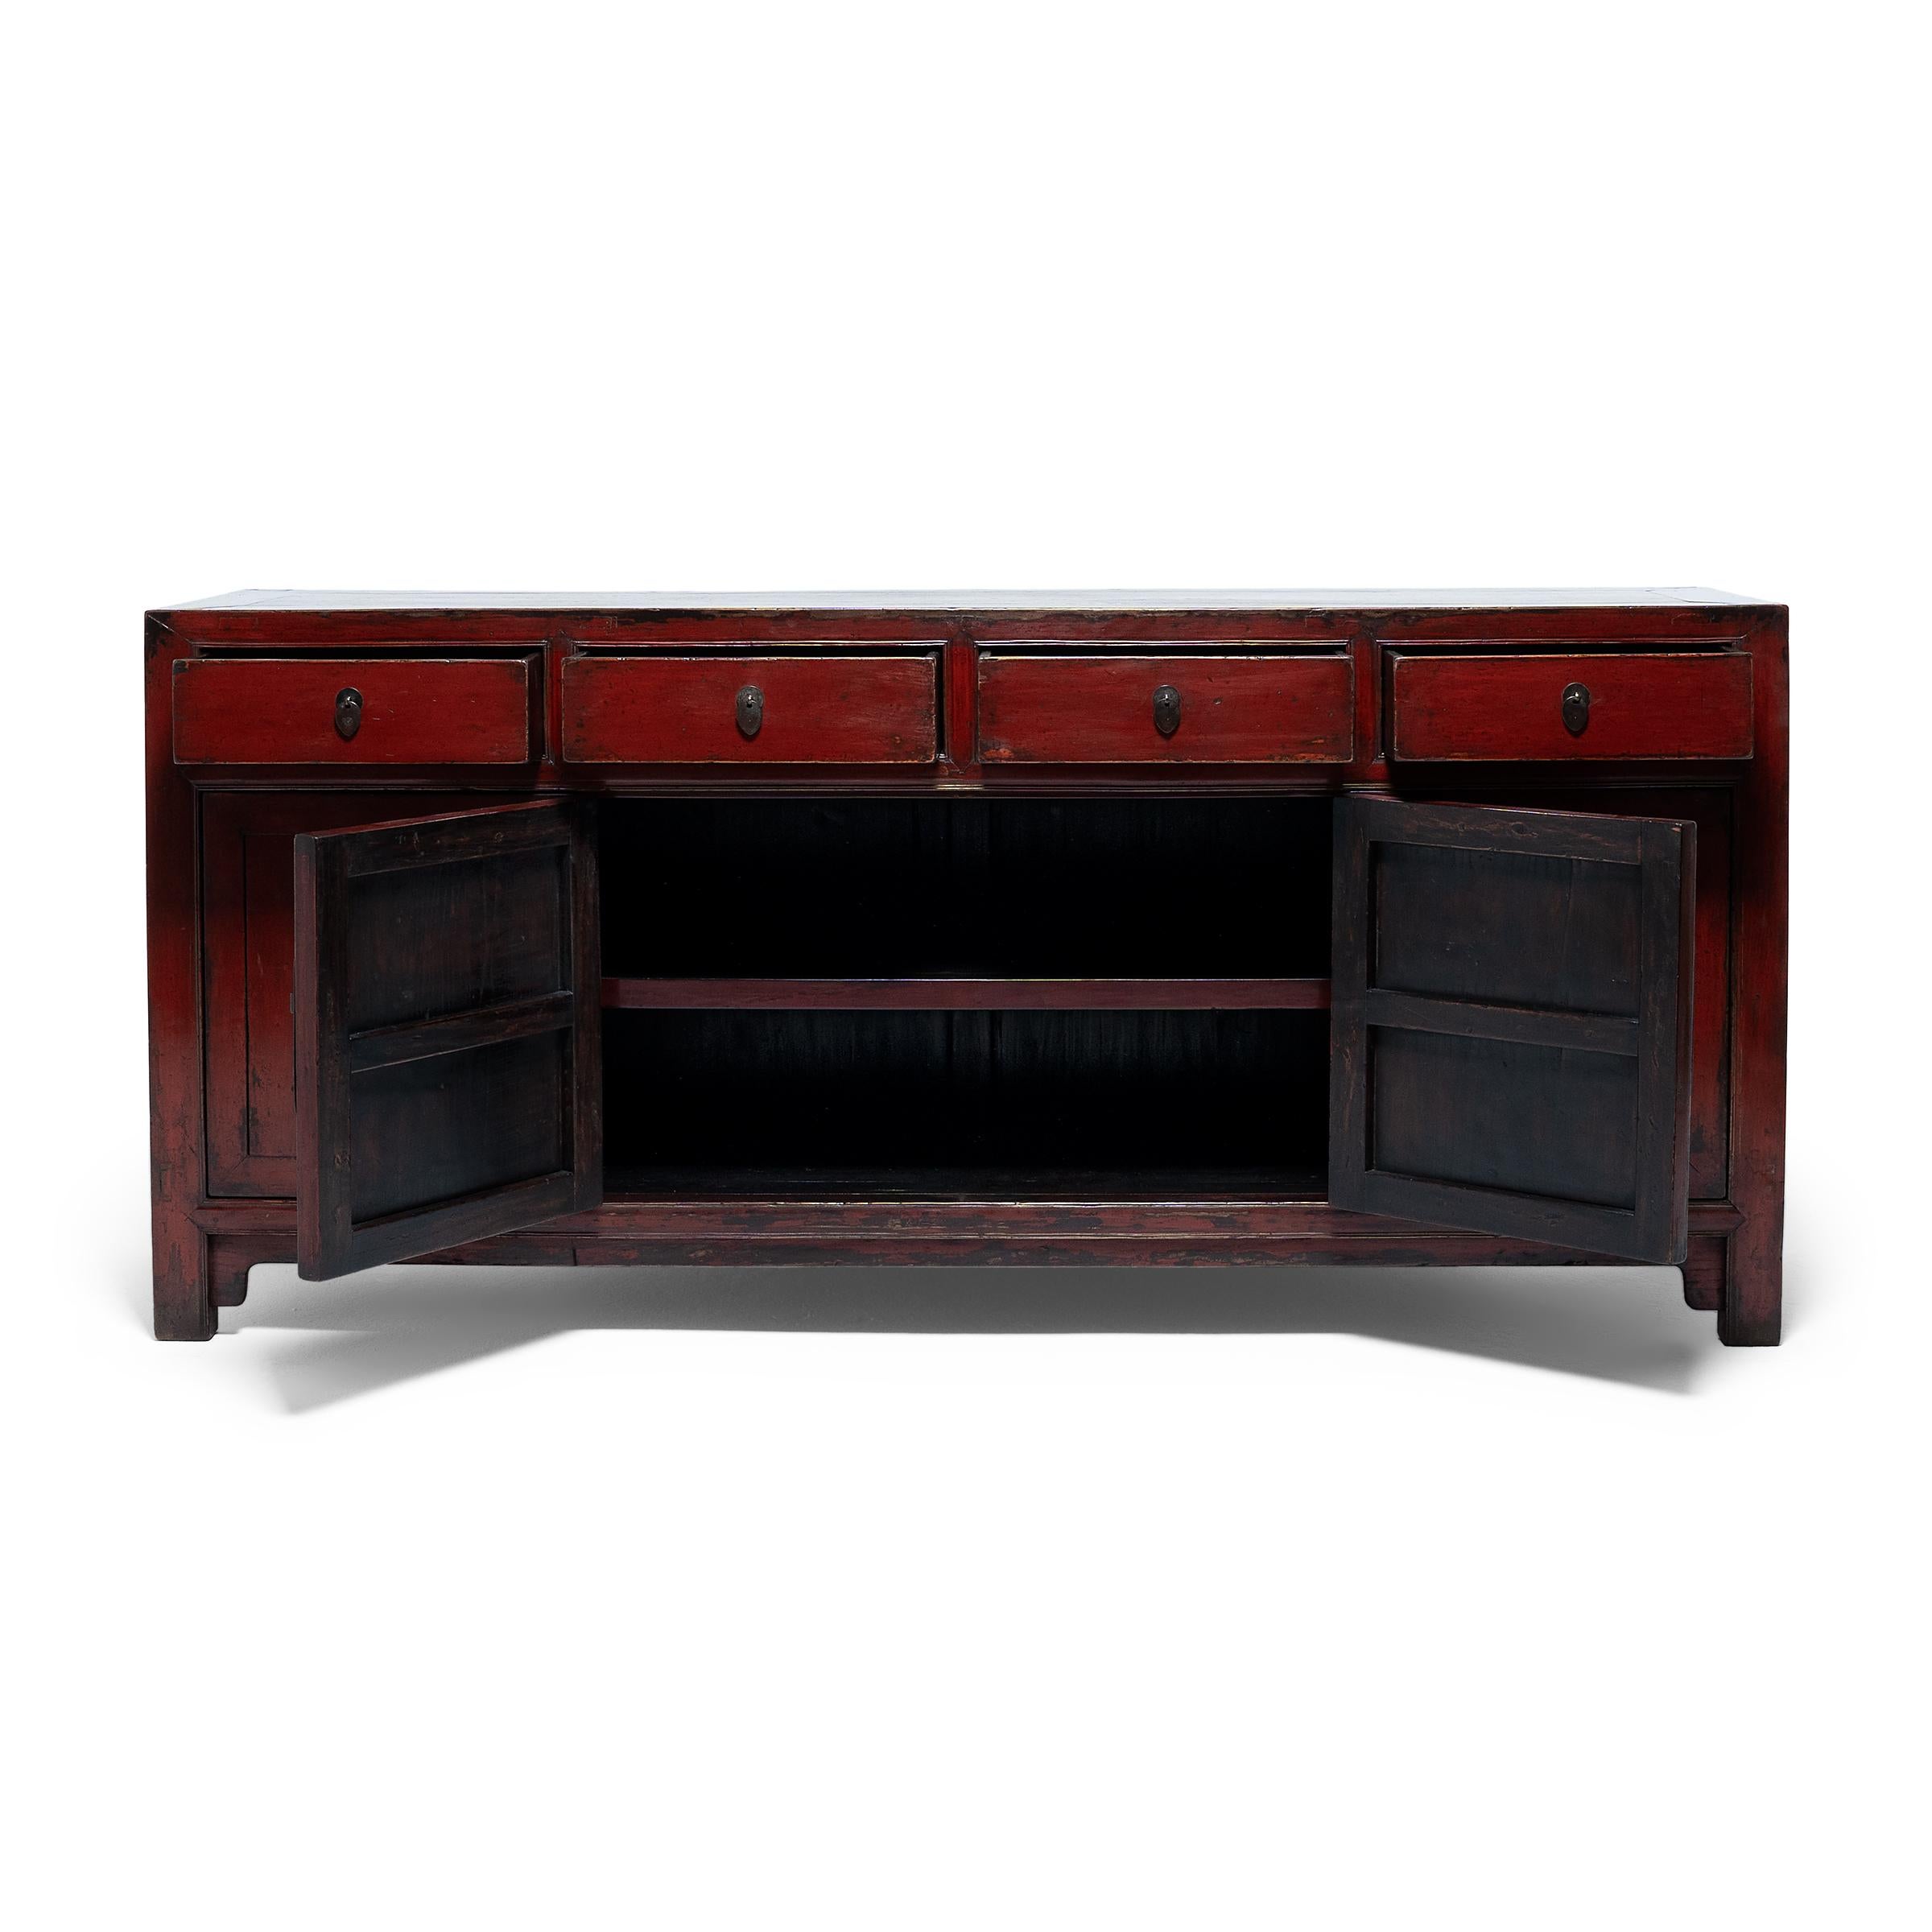 Qing Chinese Crimson Red Lacquer Coffer, circa 1800